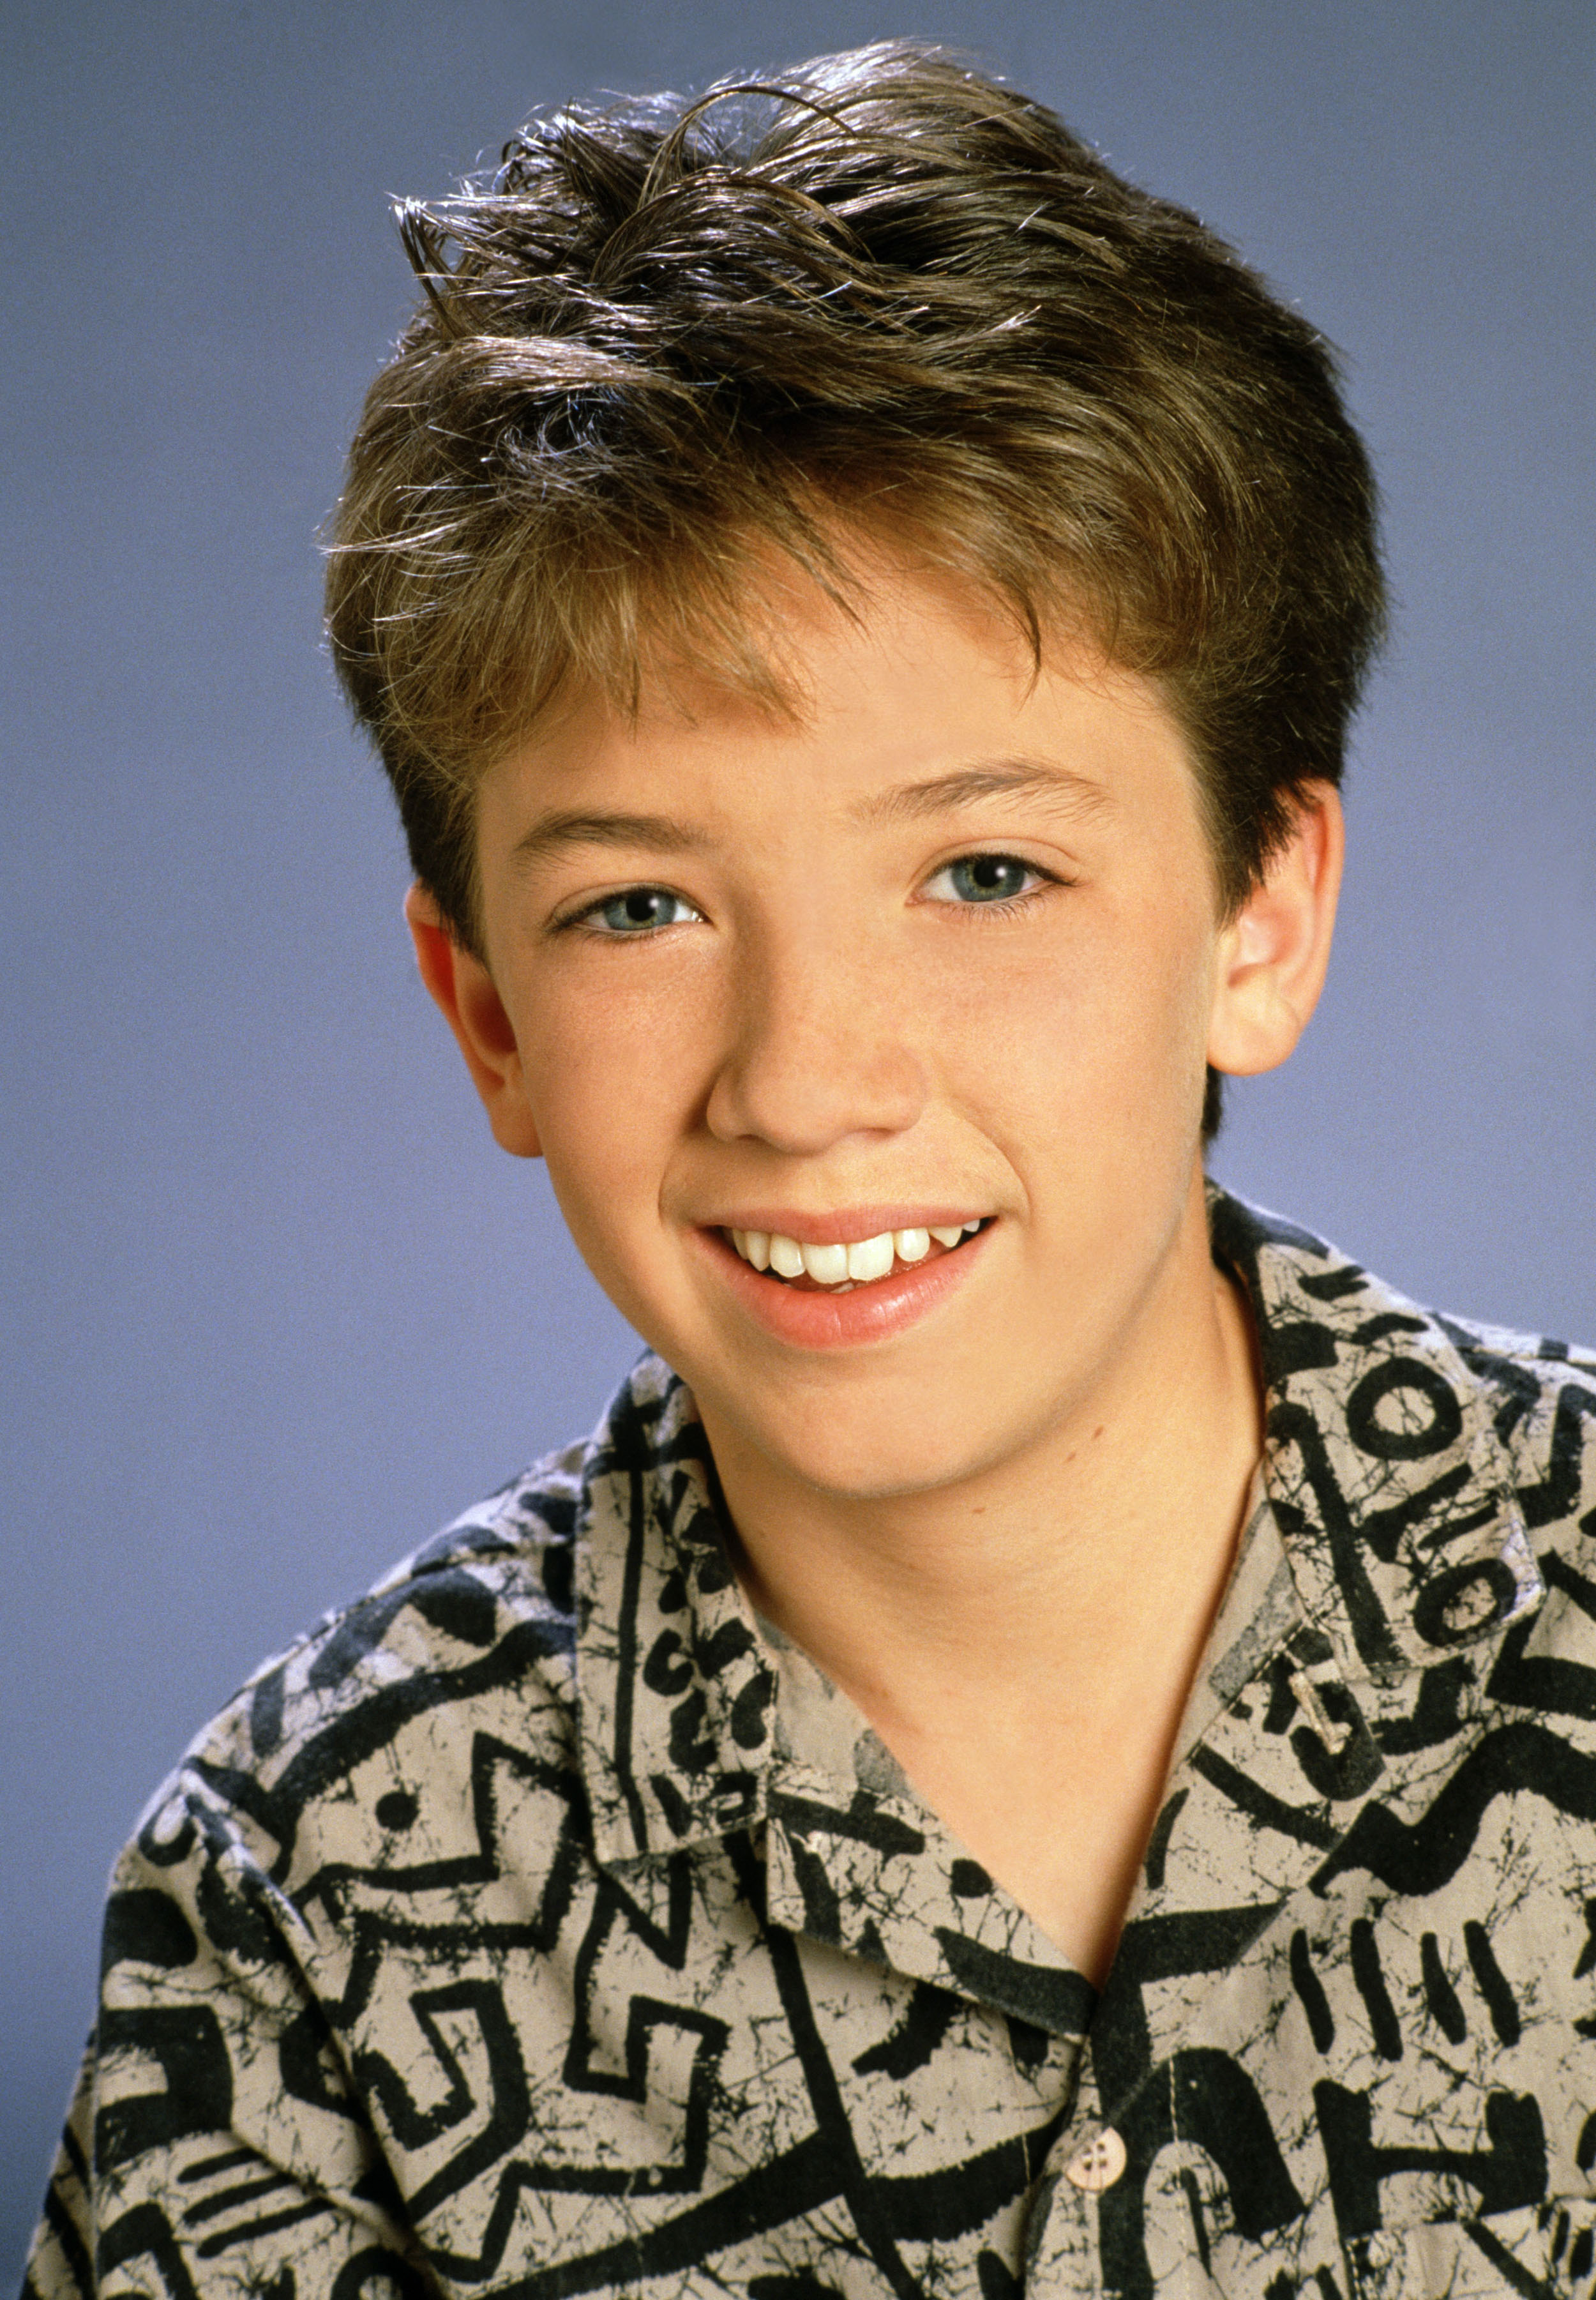 <p>David Faustino was just 3 months old when he made his TV debut on "The Lily Tomlin Special." He scored his first full-time gig at 12 when he landed the part of awkward Bud Bundy on <a href="https://www.wonderwall.com/entertainment/where-are-they-now/married-with-children-cast-actors-actresses-where-are-they-now-578703.gallery">the beloved sitcom "Married... With Children," </a>which ran for 11 seasons.</p>